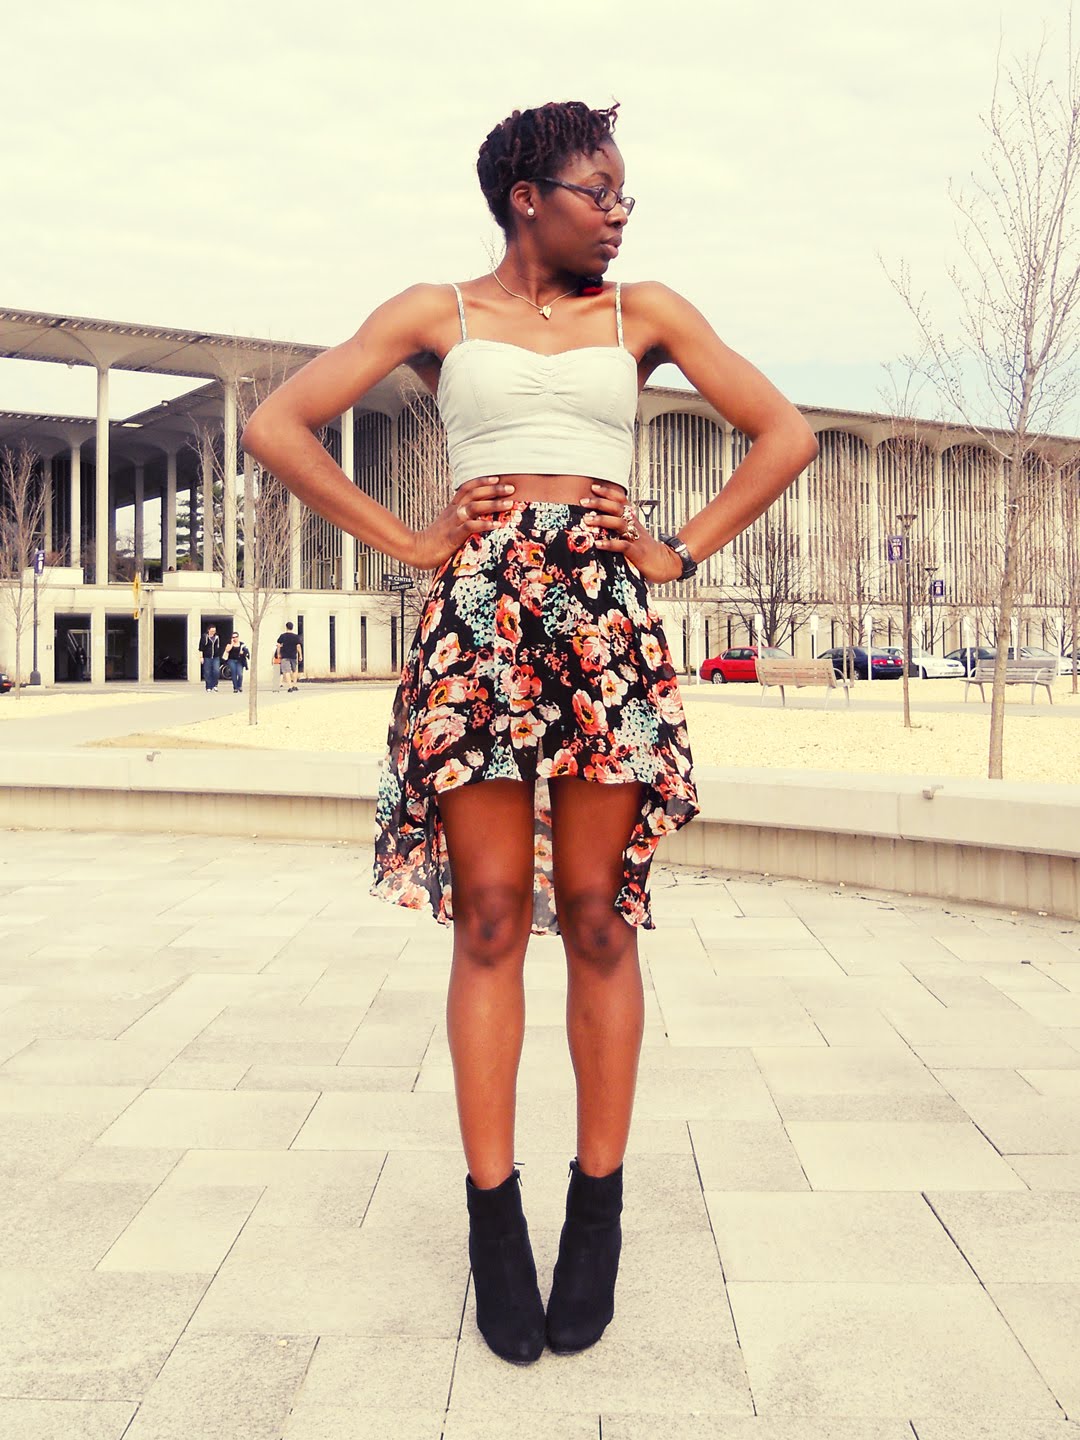 Spring Fever: Asymmetrical Skirts & Bralets - chocolate laced